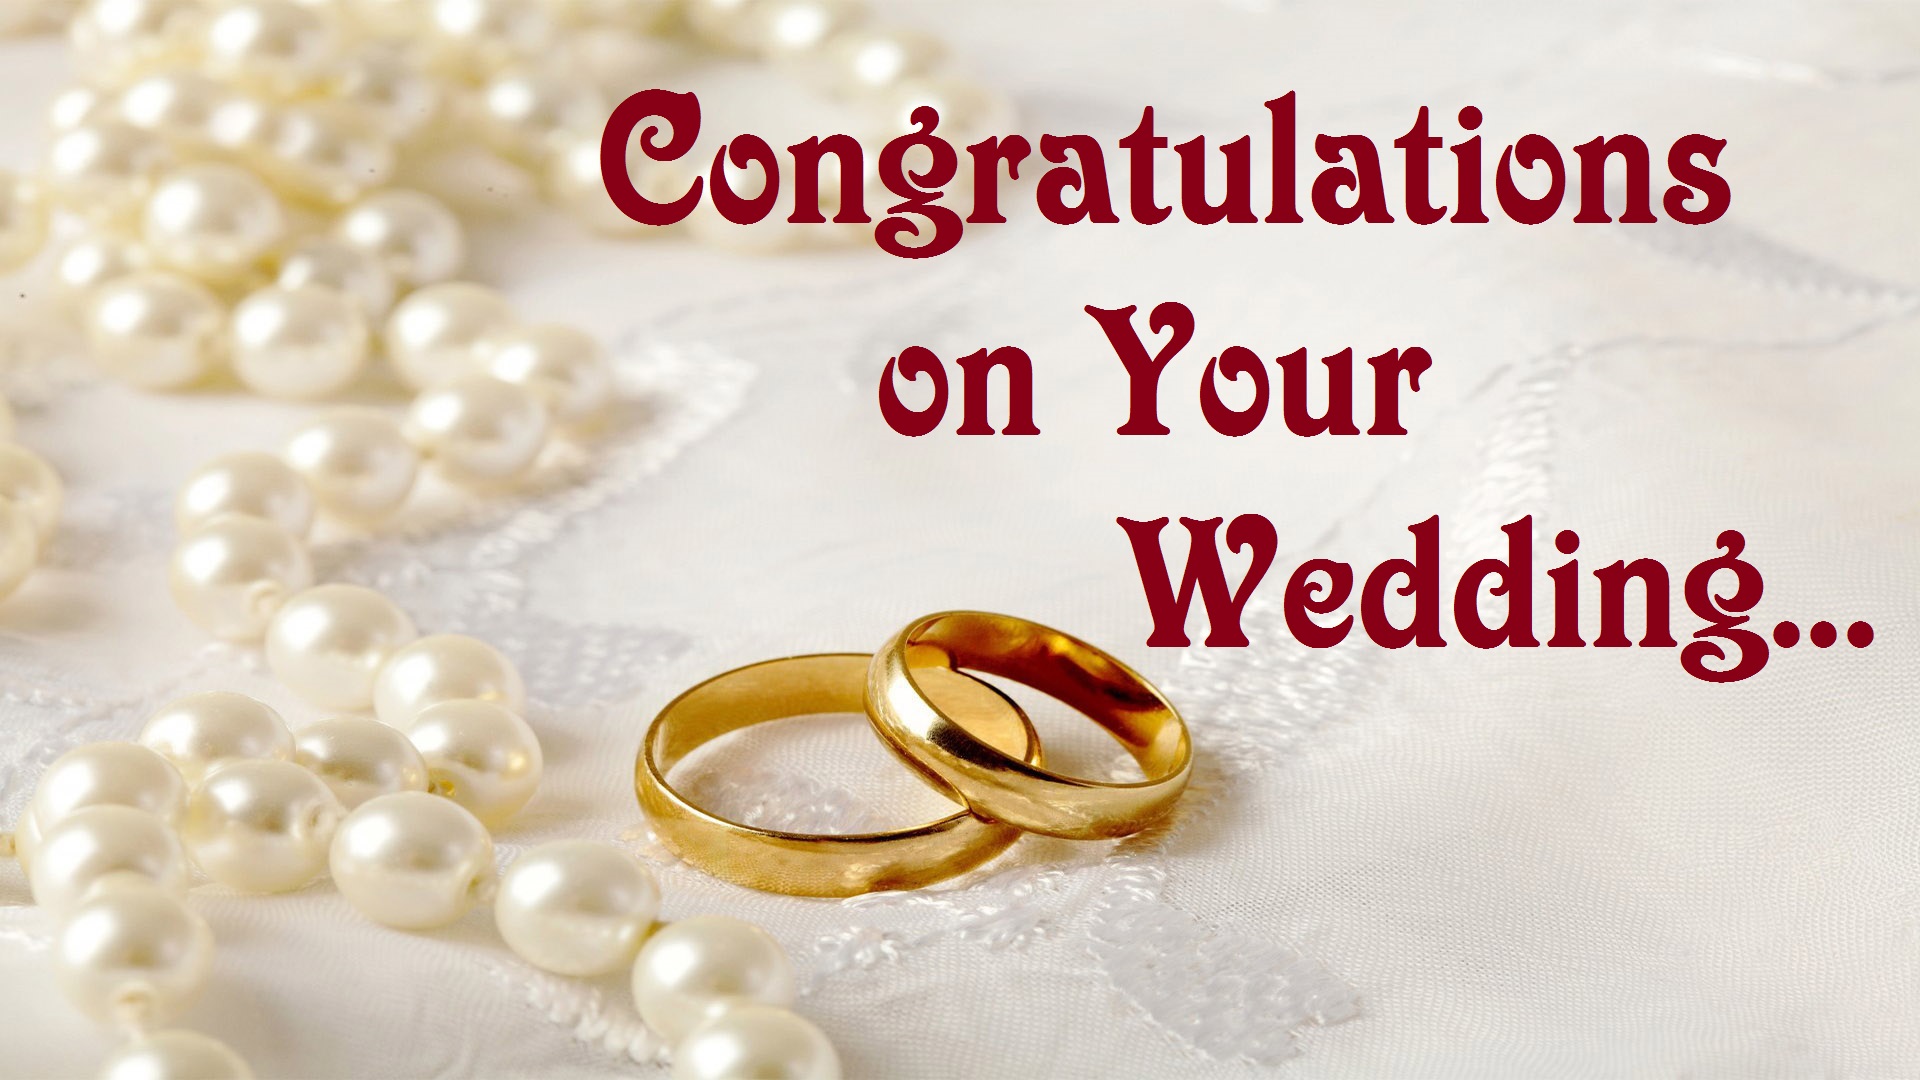 Wedding Congratulations Images And Hd Pictures Wedding Greeting Cards ...